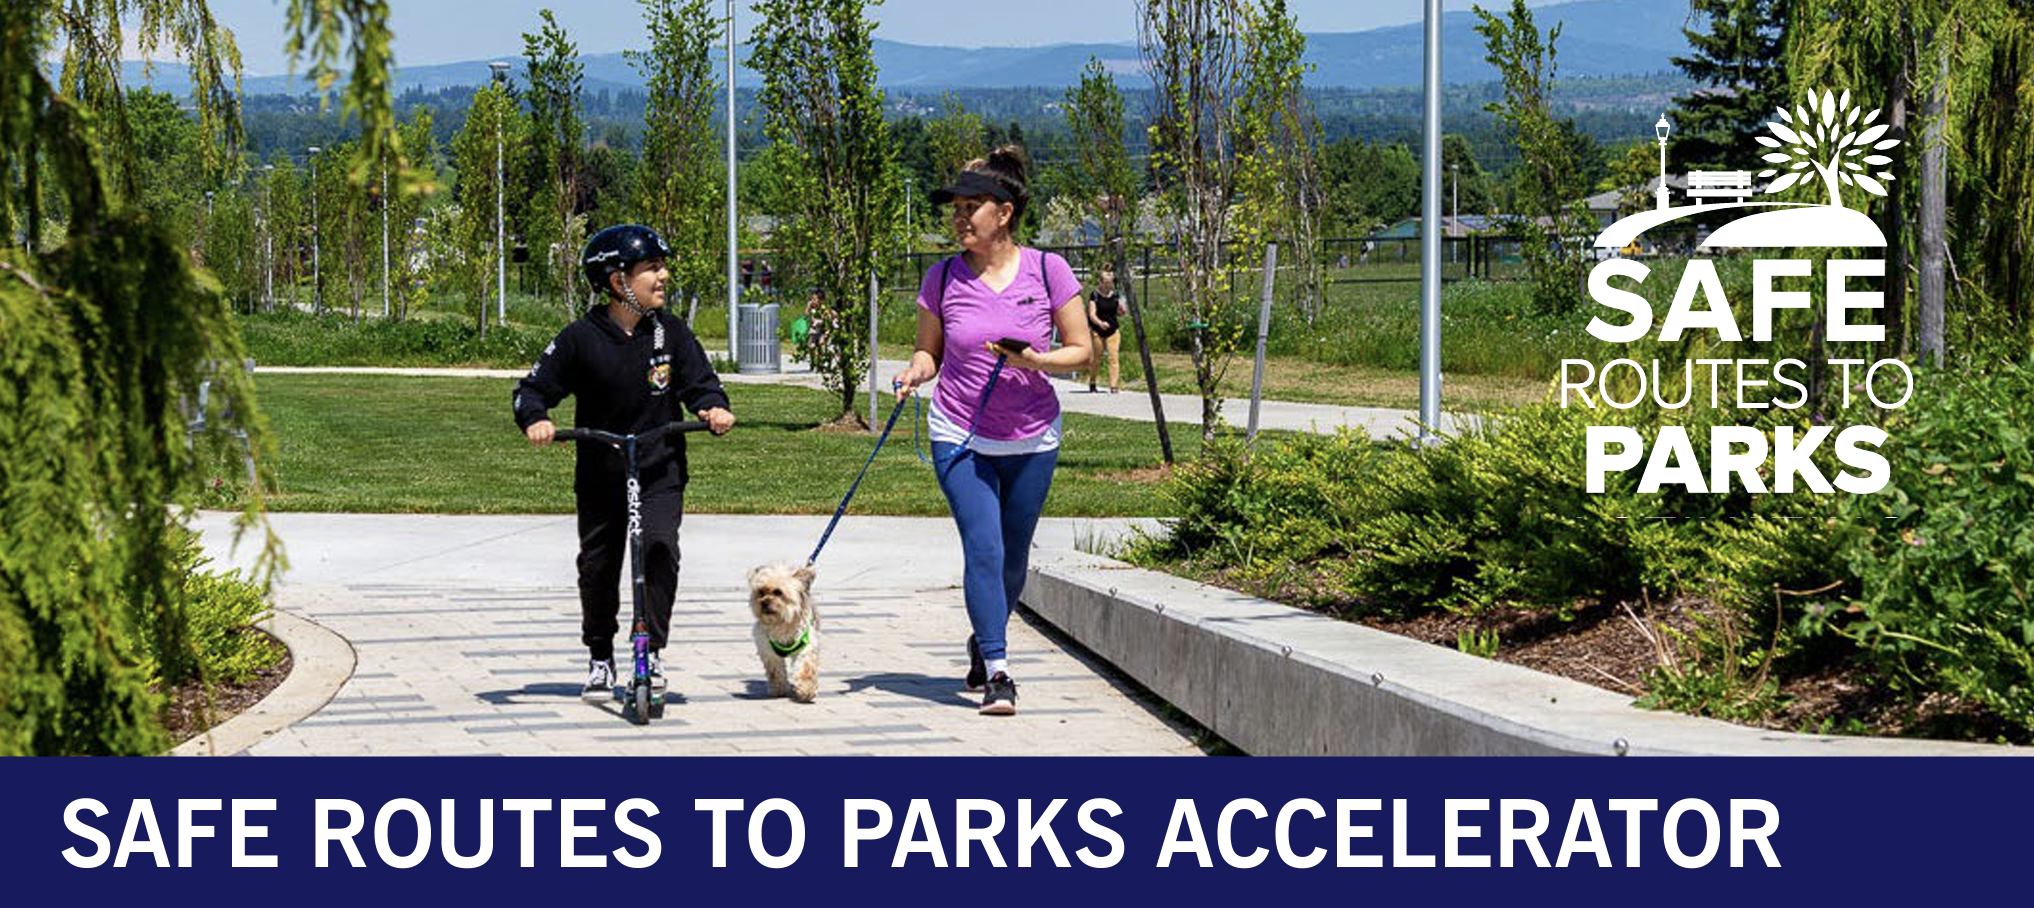 A parent walks a small dog while their child rides a scooter in a local park. The text reads "Safe Routes to Parks"and "Safe Routes to Parks Accelerator"